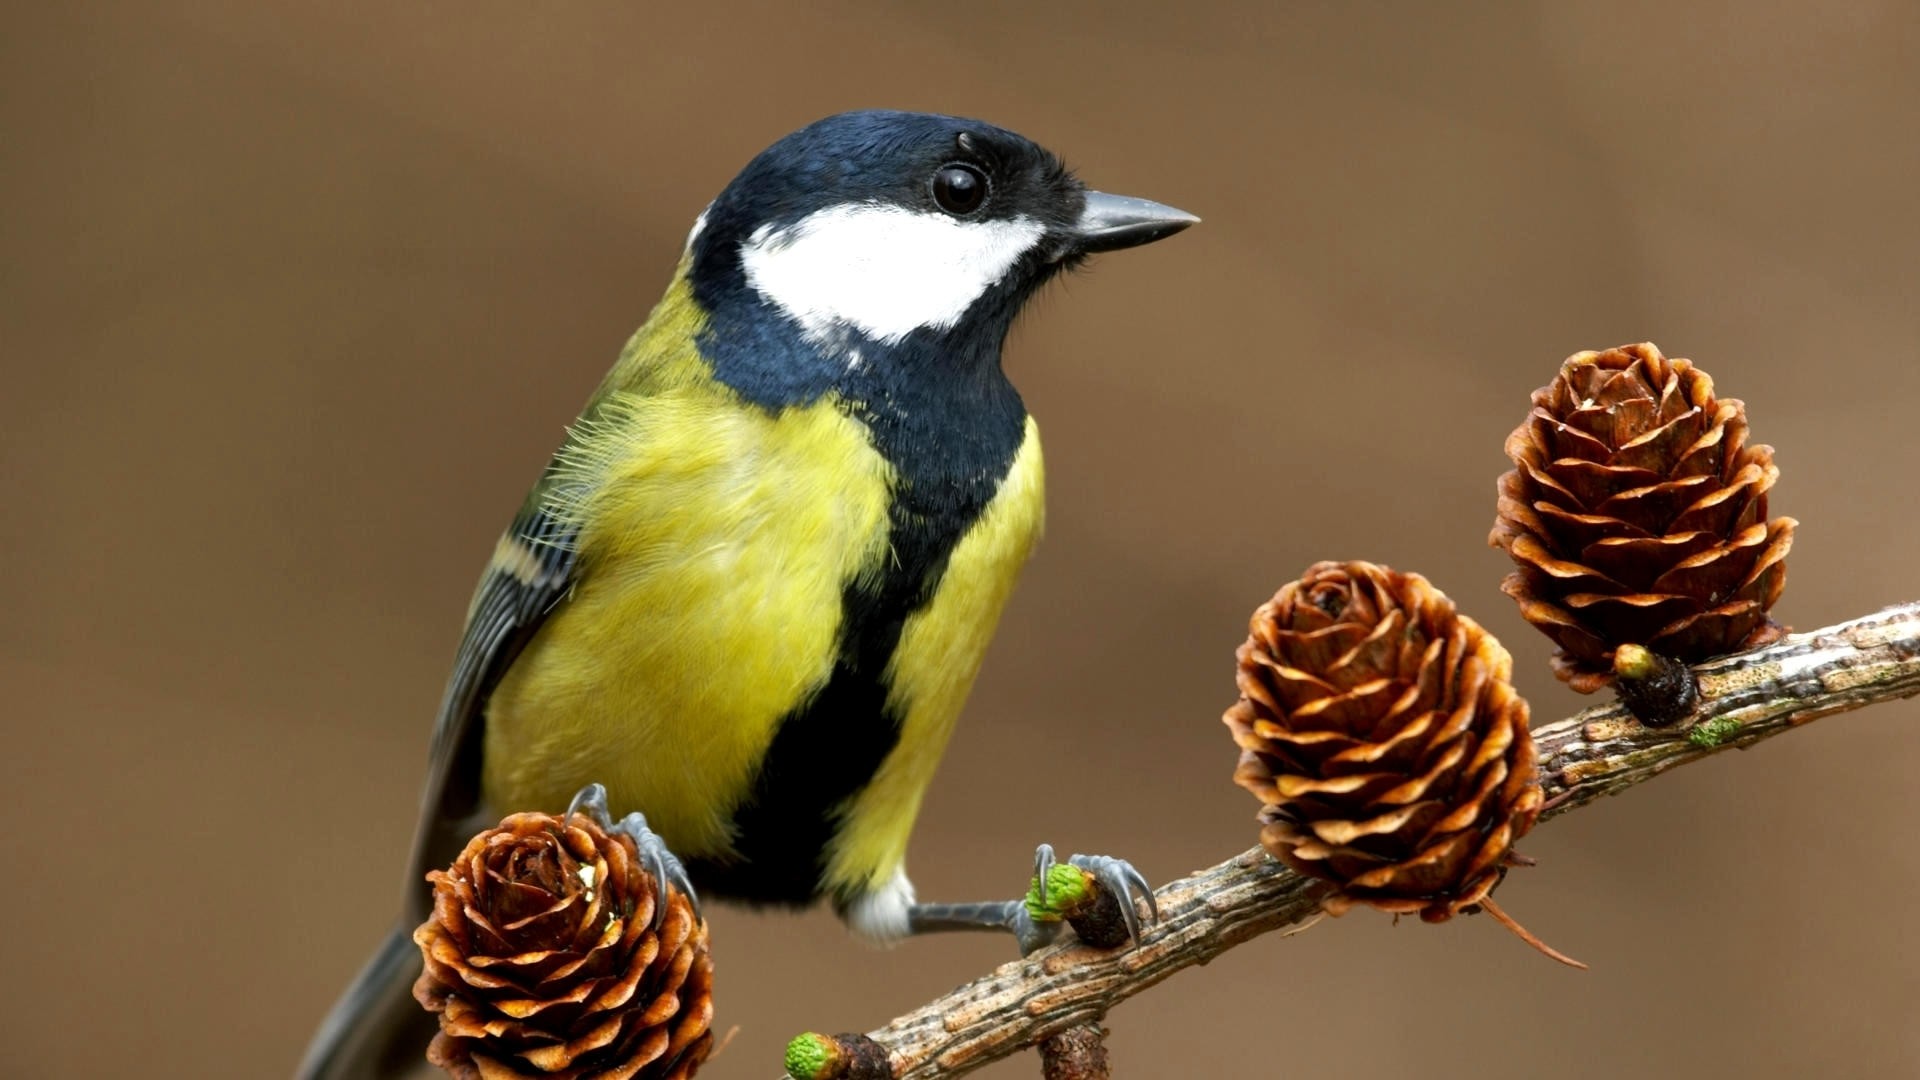 Great Tit (parus major), a stunning bird species known as the Titmouse.